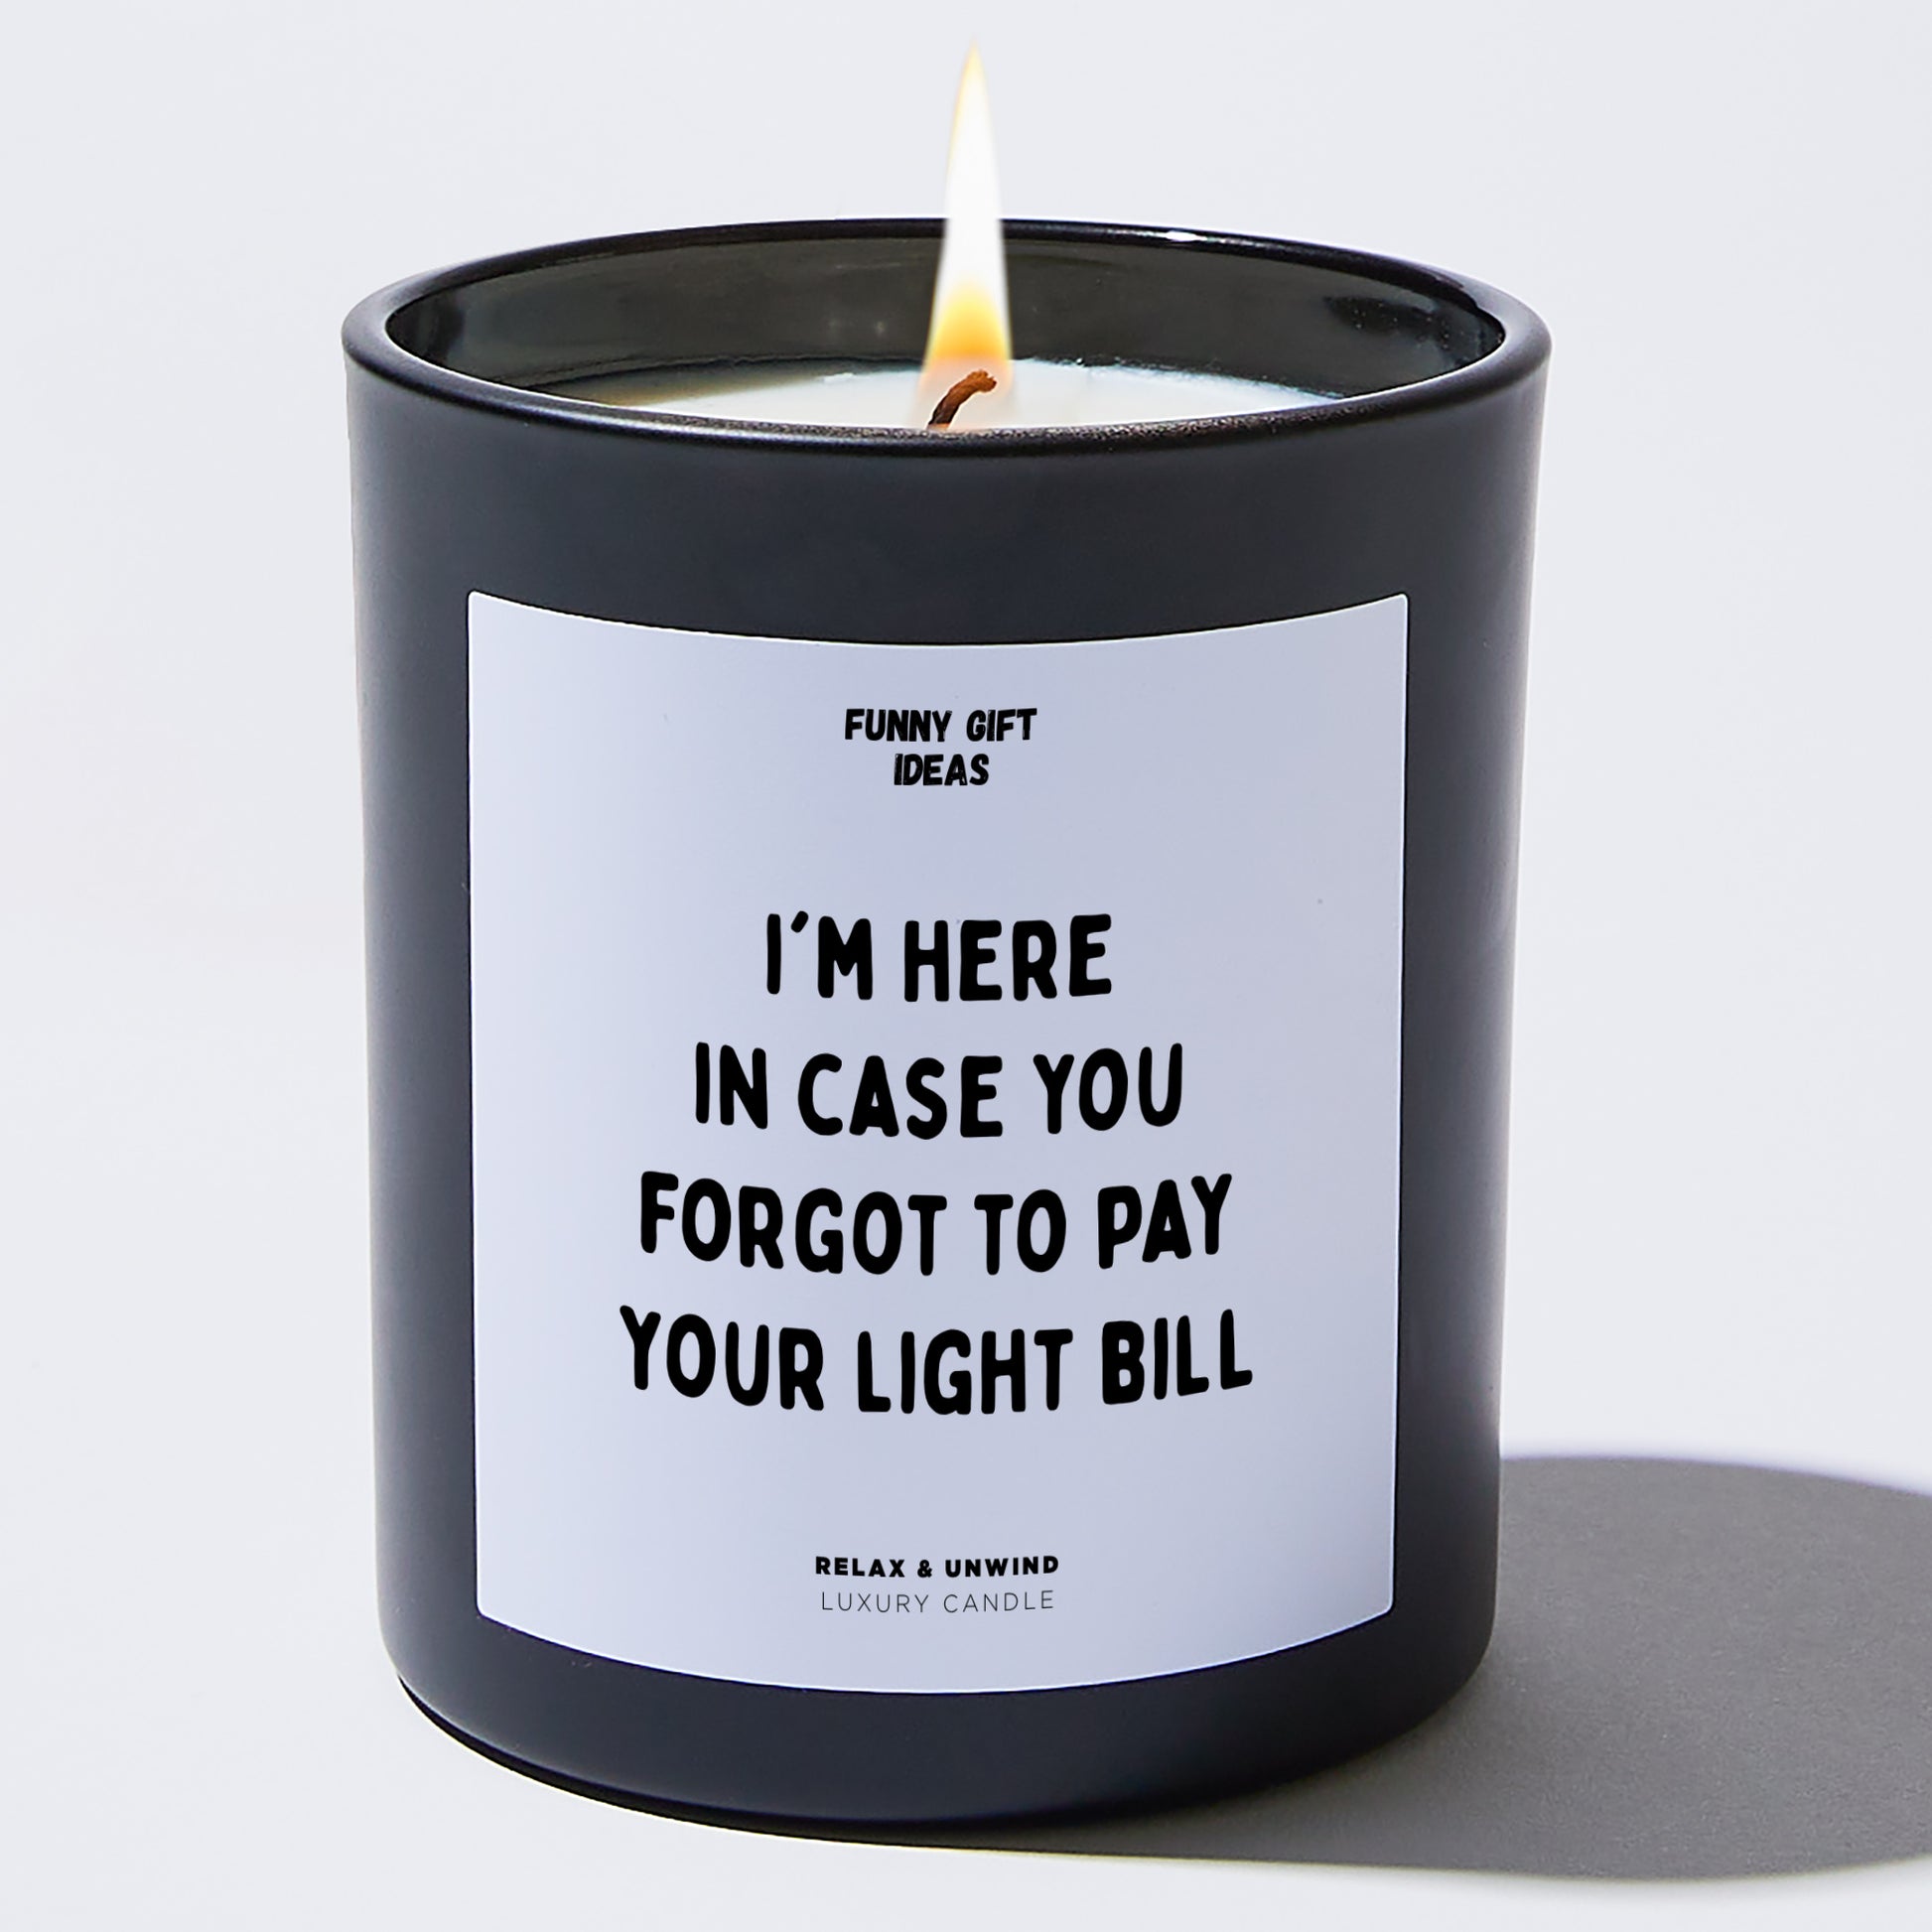 Unique Housewarming Gift I'm Here In Case You Forgot To Pay Your Light Bill - Funny Gift Ideas